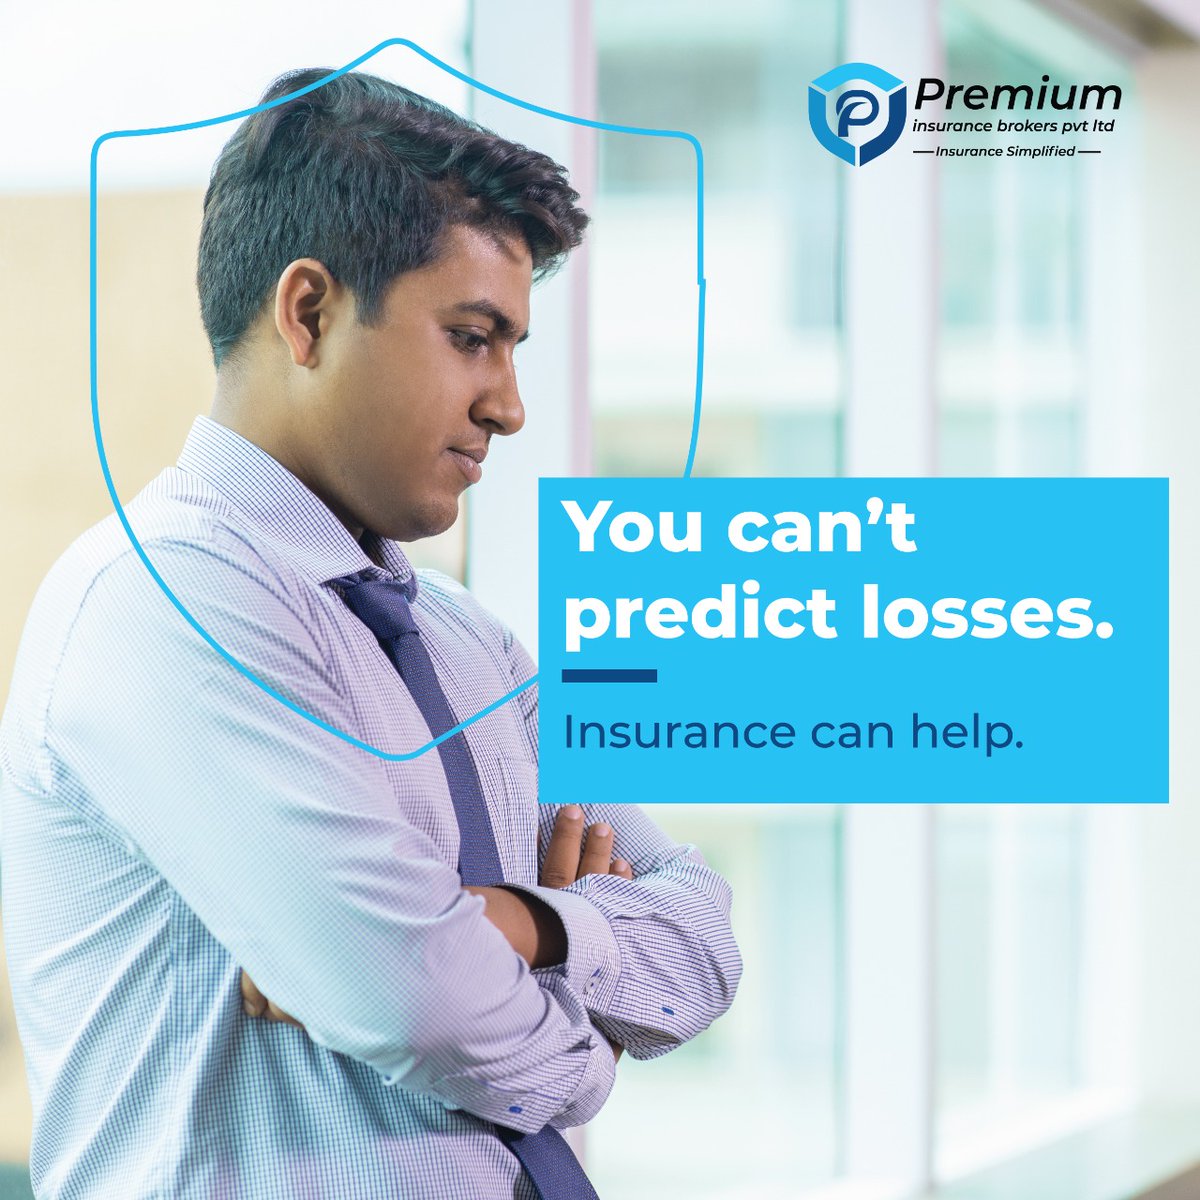 Don't let losses ruin your financial future. Insurance helps protect your assets against instability. 
.
.
.
#premiuminsurance #insurancesimplified #businessinsurance #morethaninsurance #insurance #onlineinsurancepolicy #lifeinsurance #insuranceagent #healthinsurance